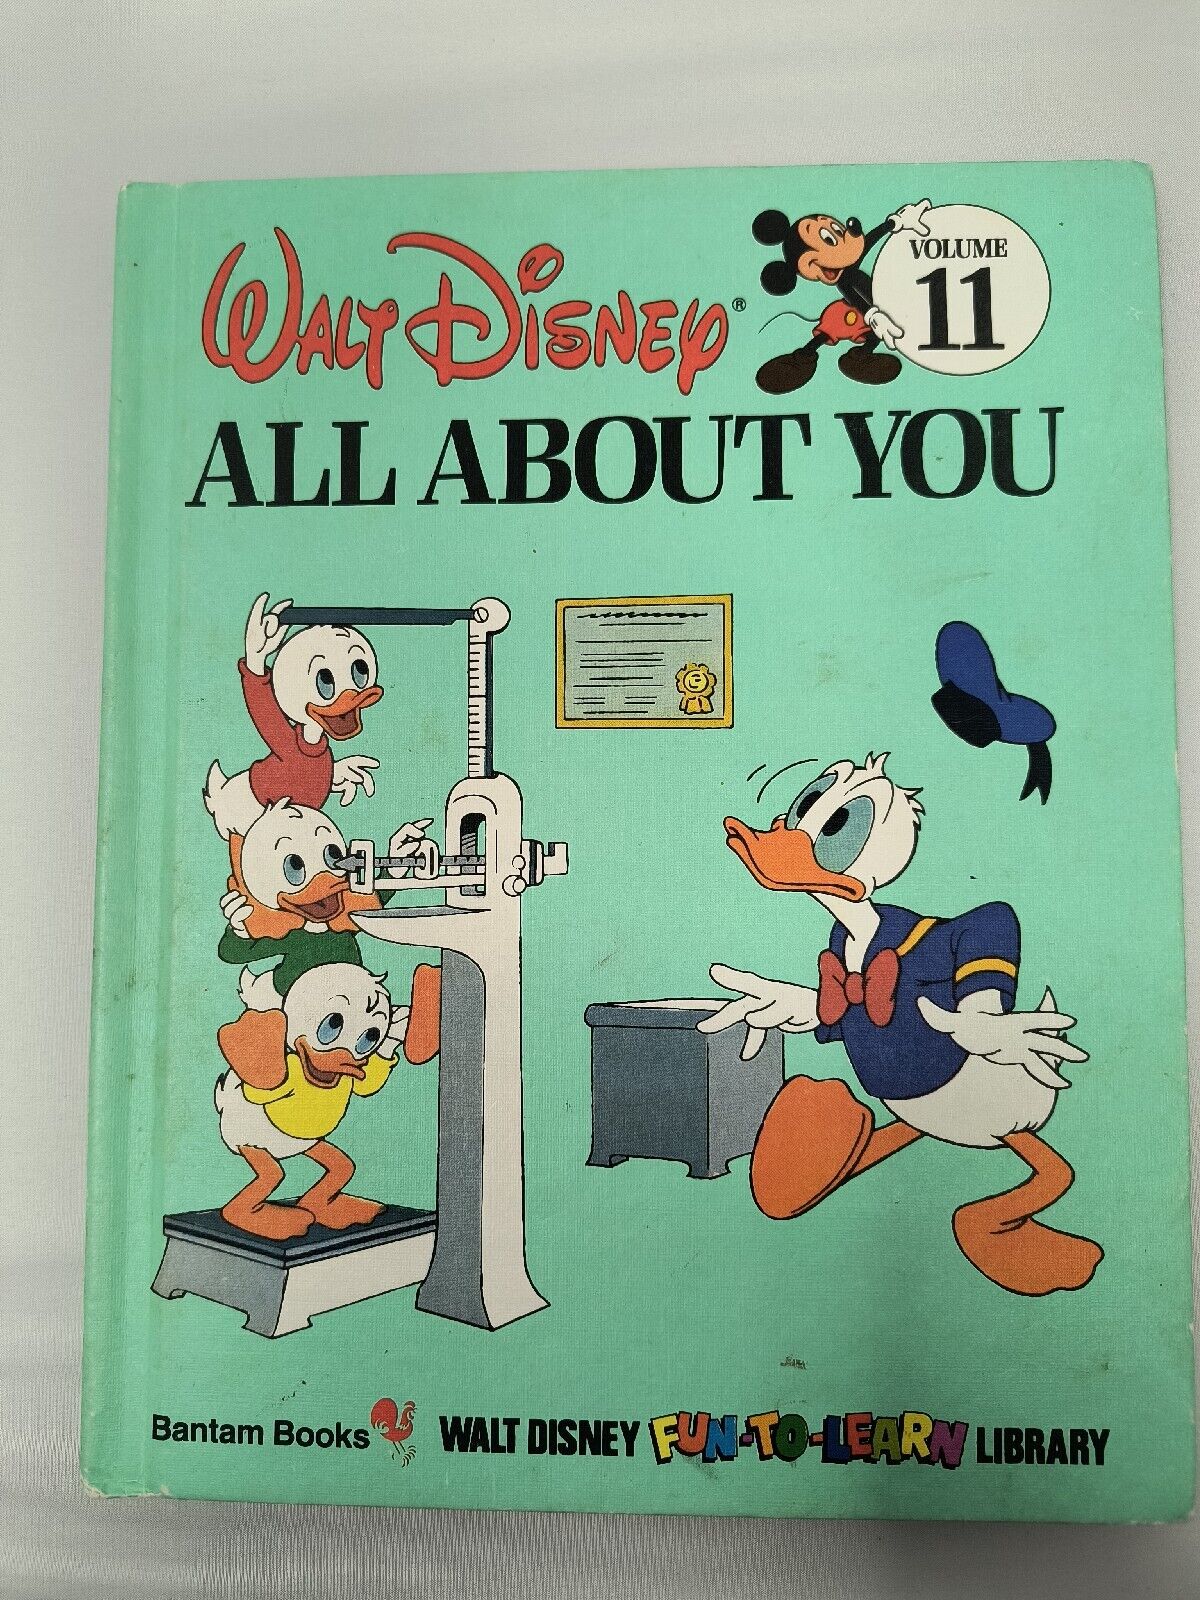 Disney Fun-To-Learn Library Volume 11 All About You 1984